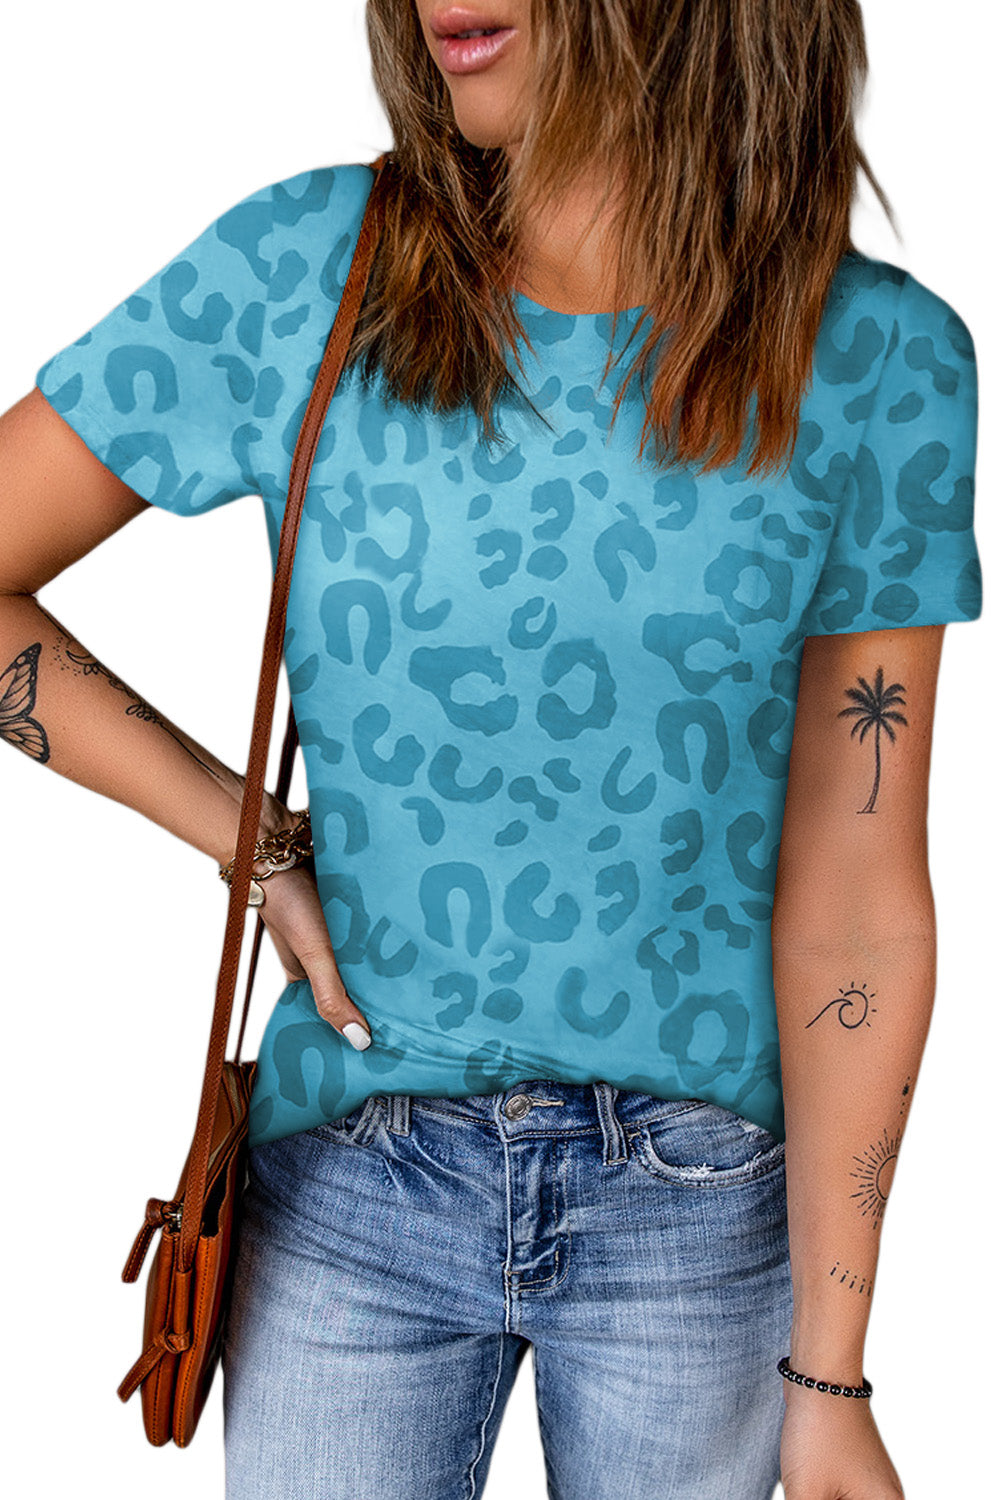 Leopard Round Neck Tee - Kawaii Stop - Chic Style, Comfortable, Easy Care, Everyday Wear, Fierce Fashion, Glamorous Look, Leopard Round Neck Tee, No Sheer, Ship From Overseas, Size Guide, Stylish Apparel, SYNZ, T-Shirt, T-Shirts, Tee, Trendy Print, Wild Side, Women's Clothing, Women's Top